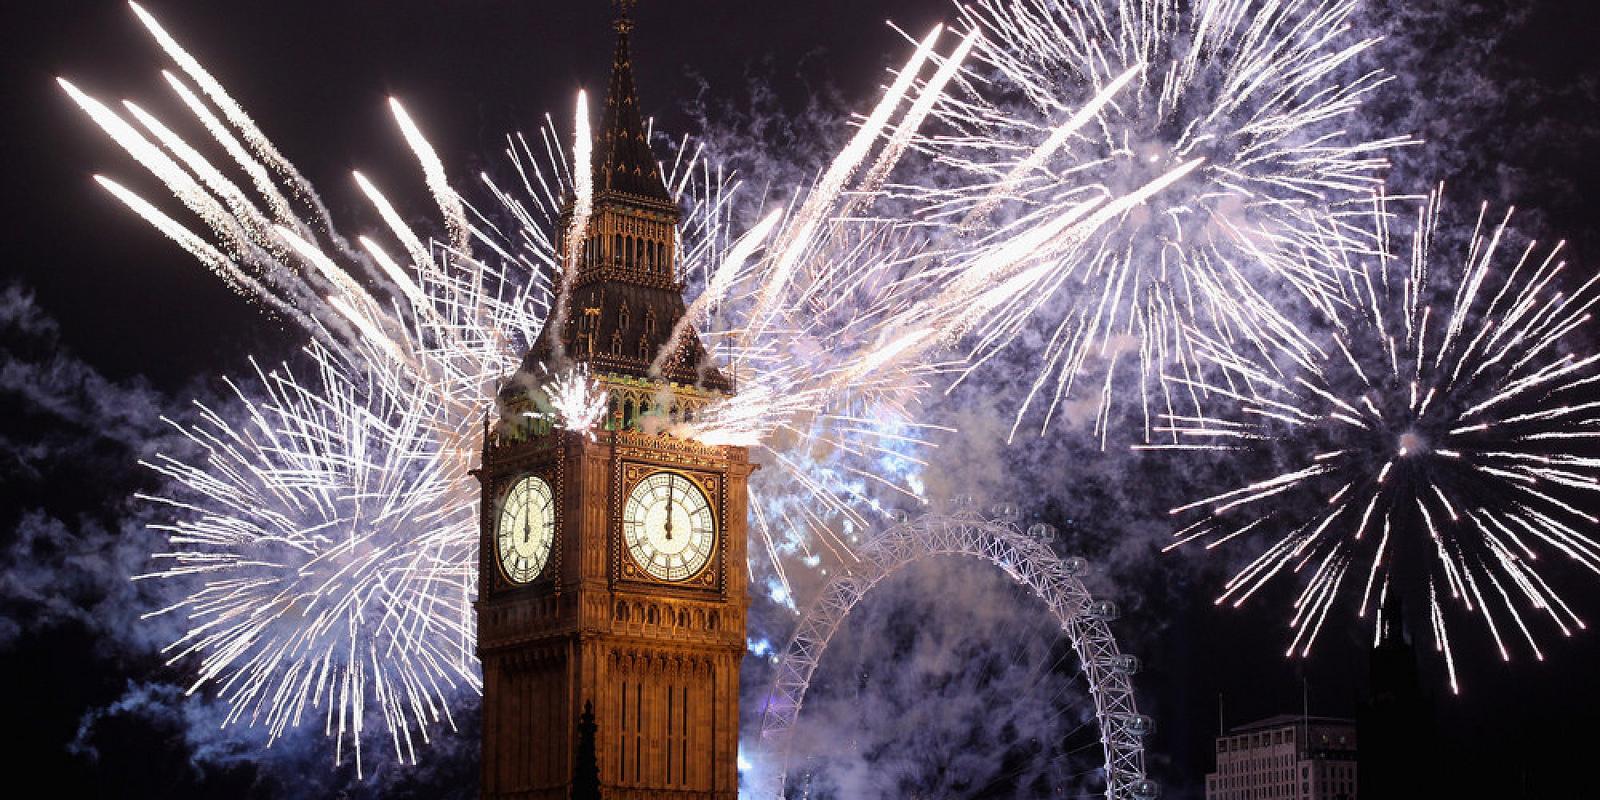 Big Ben chimes in New Year's Fireworks London 